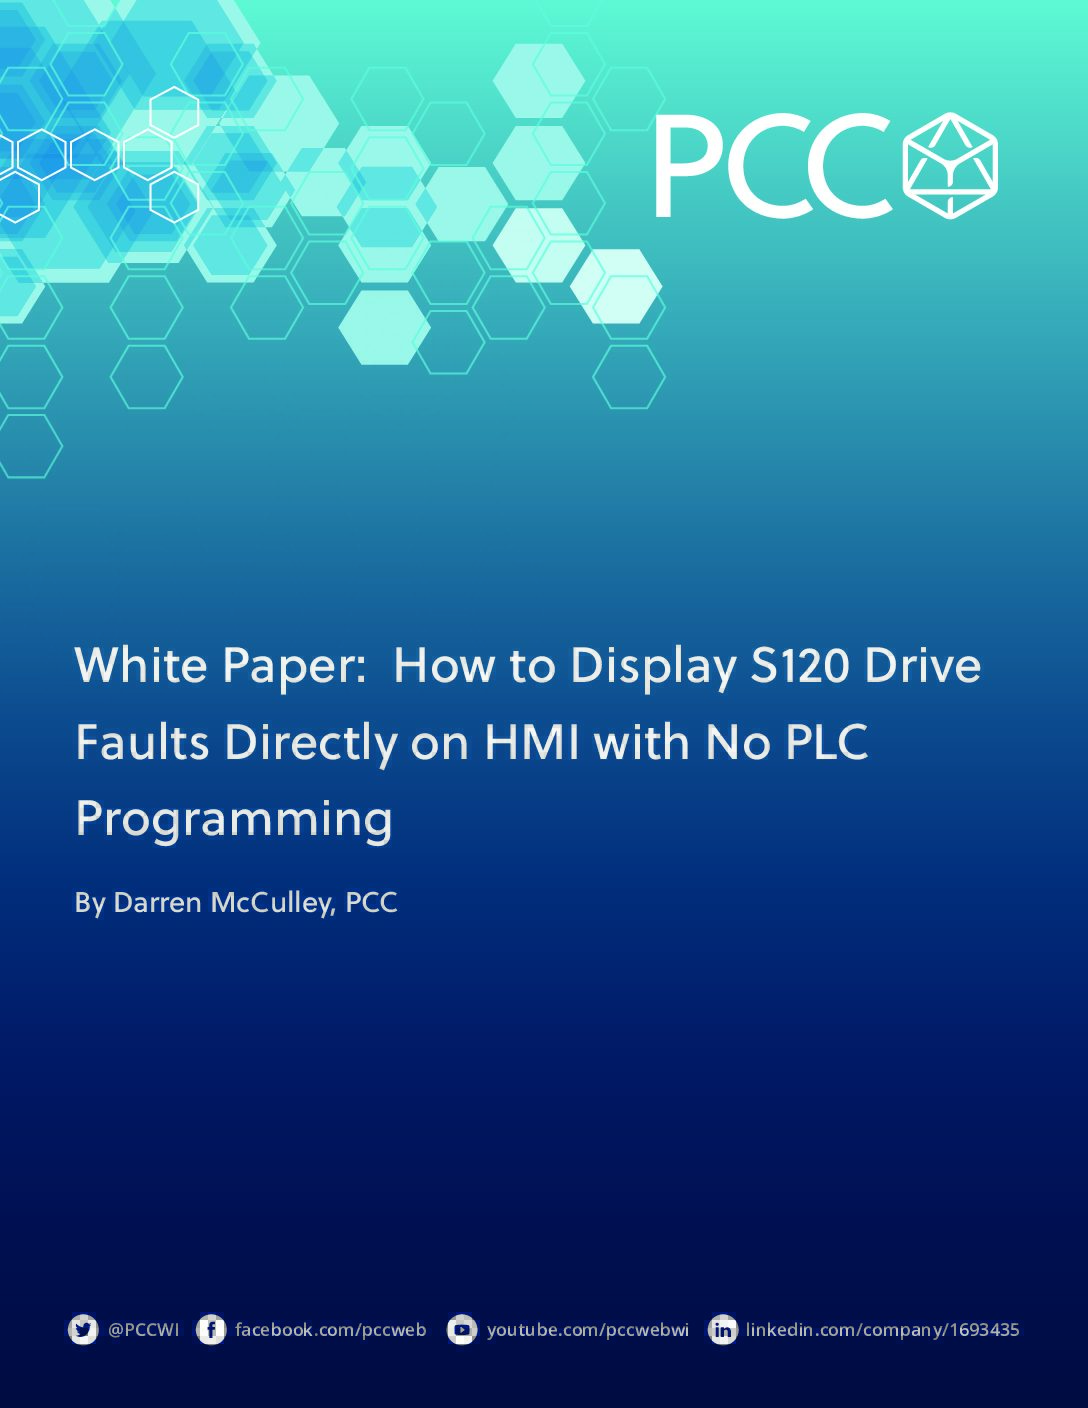 White Paper: How to Display S120 Drive Faults Directly on HMI with No PLC Programming